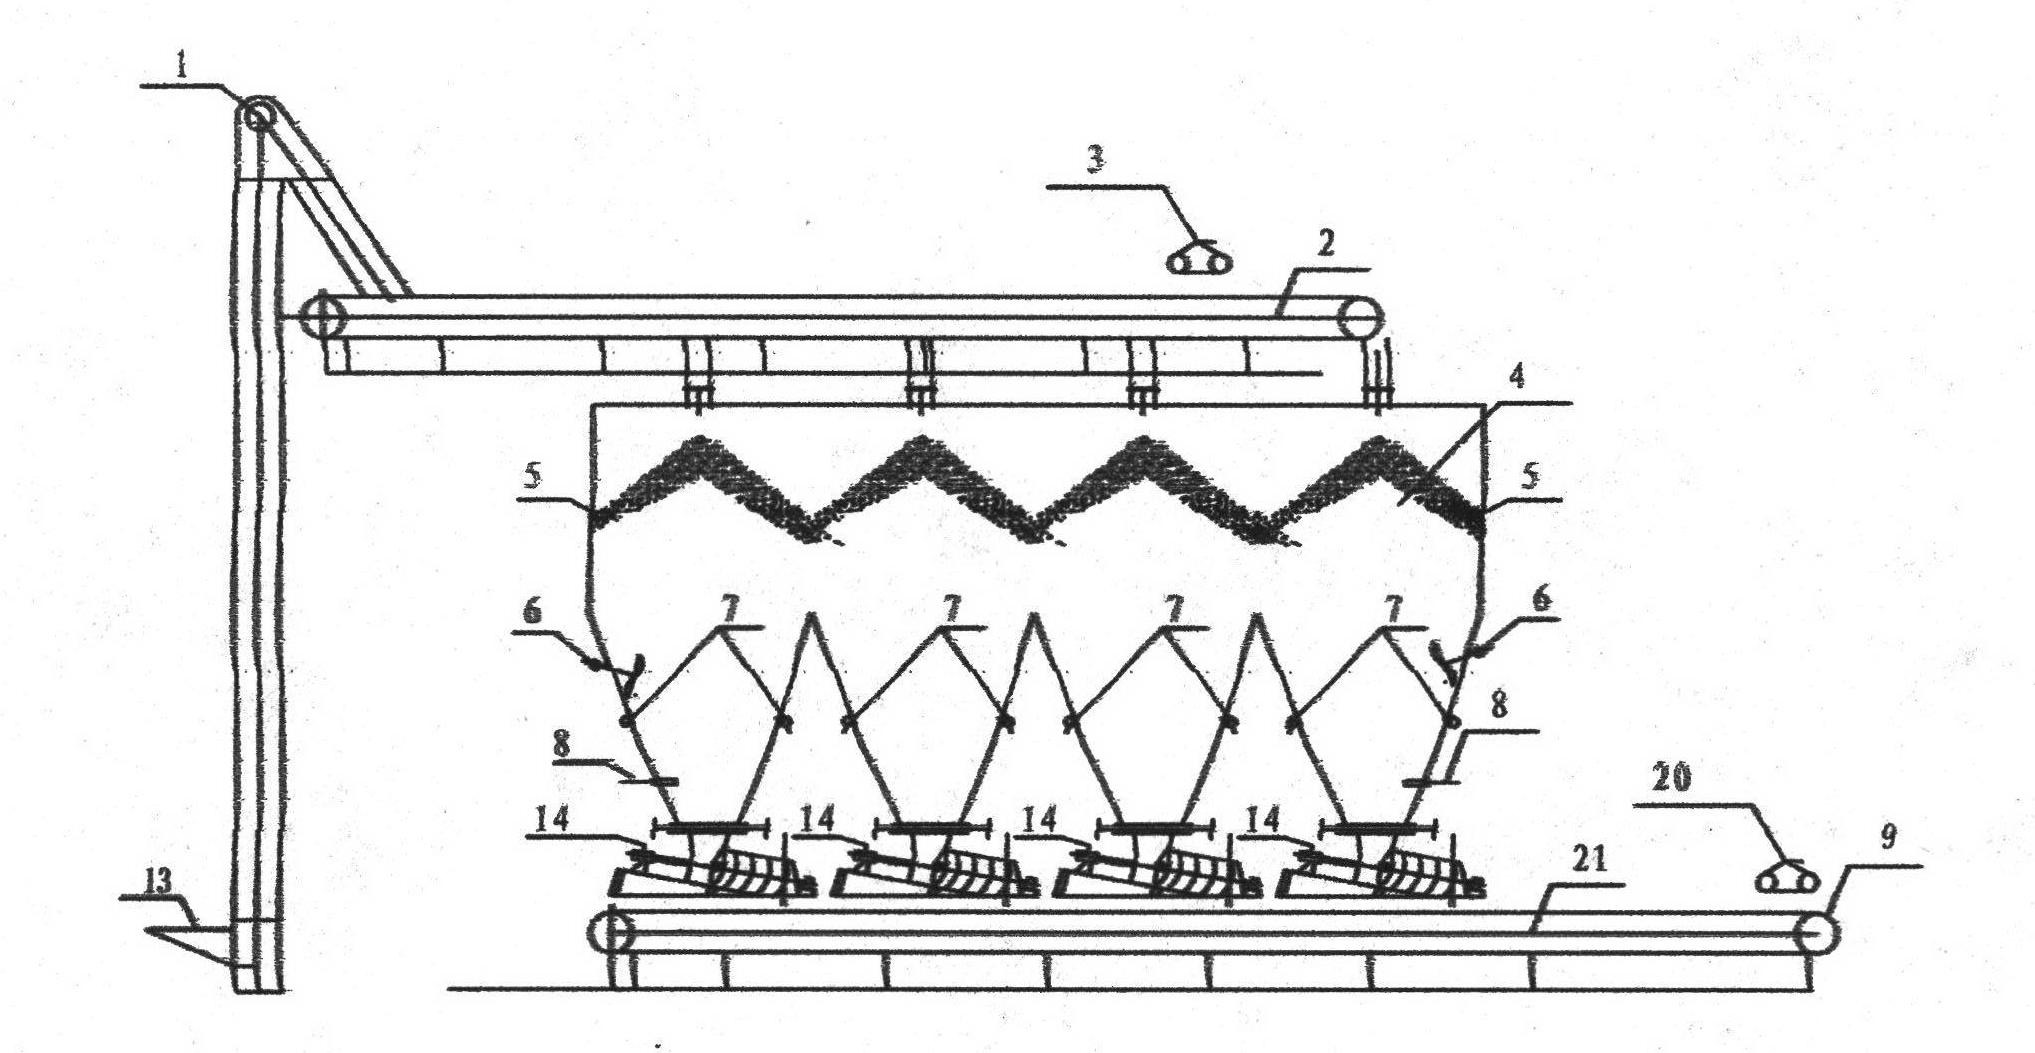 Raw material storage device for tapioca chips